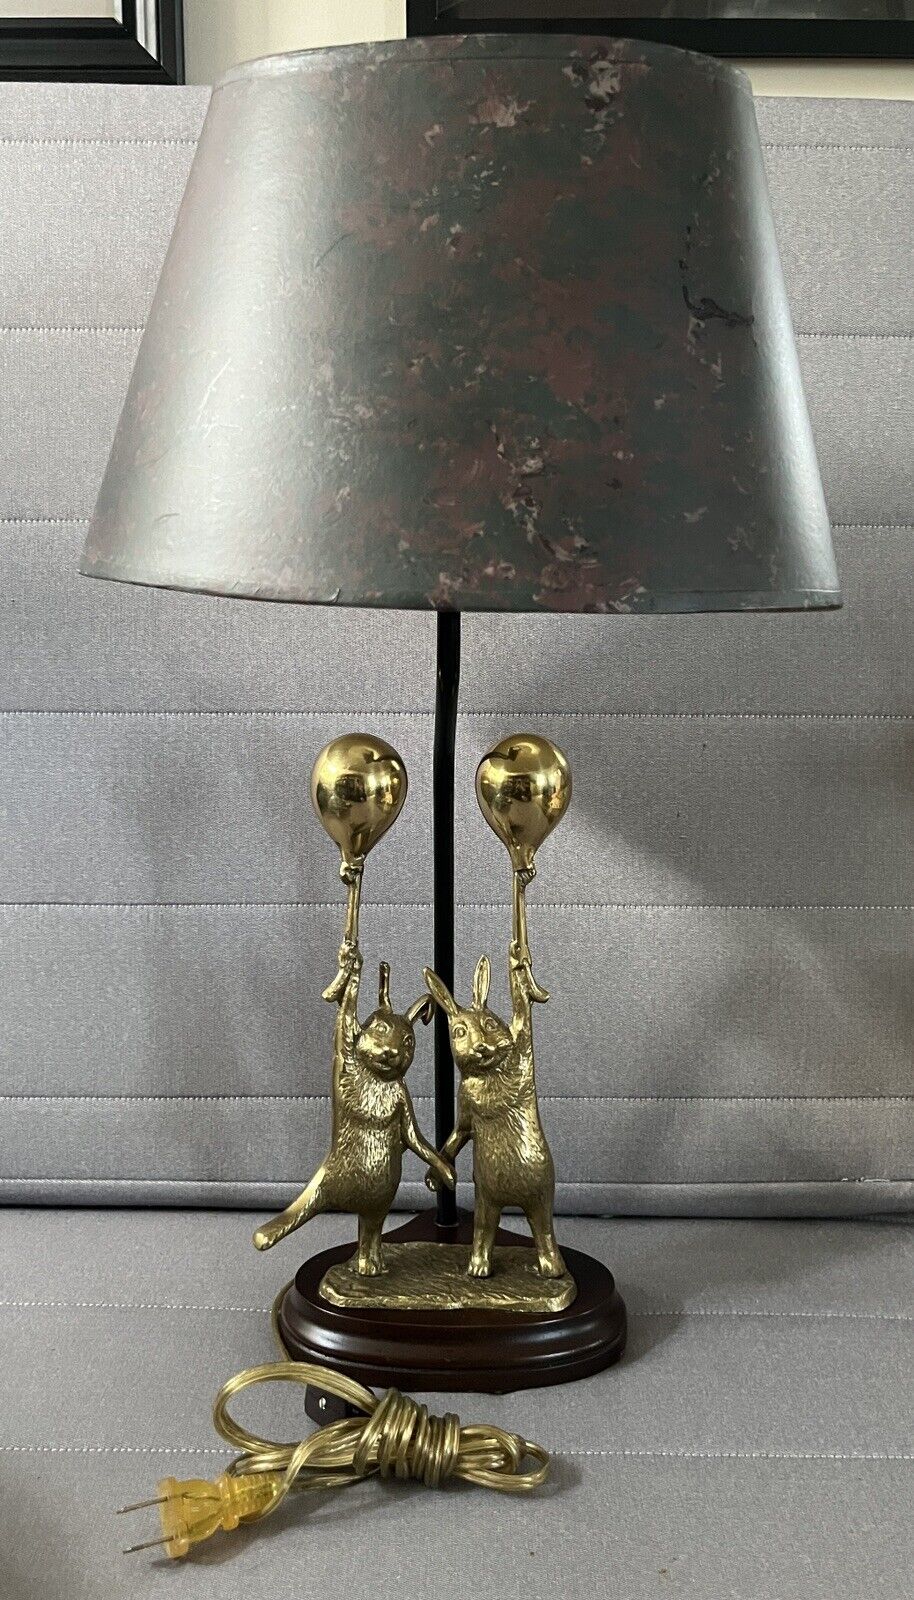 Brass Bunnies With Balloons Vintage Lamp Wood Base Nursery Bedroom Traditional